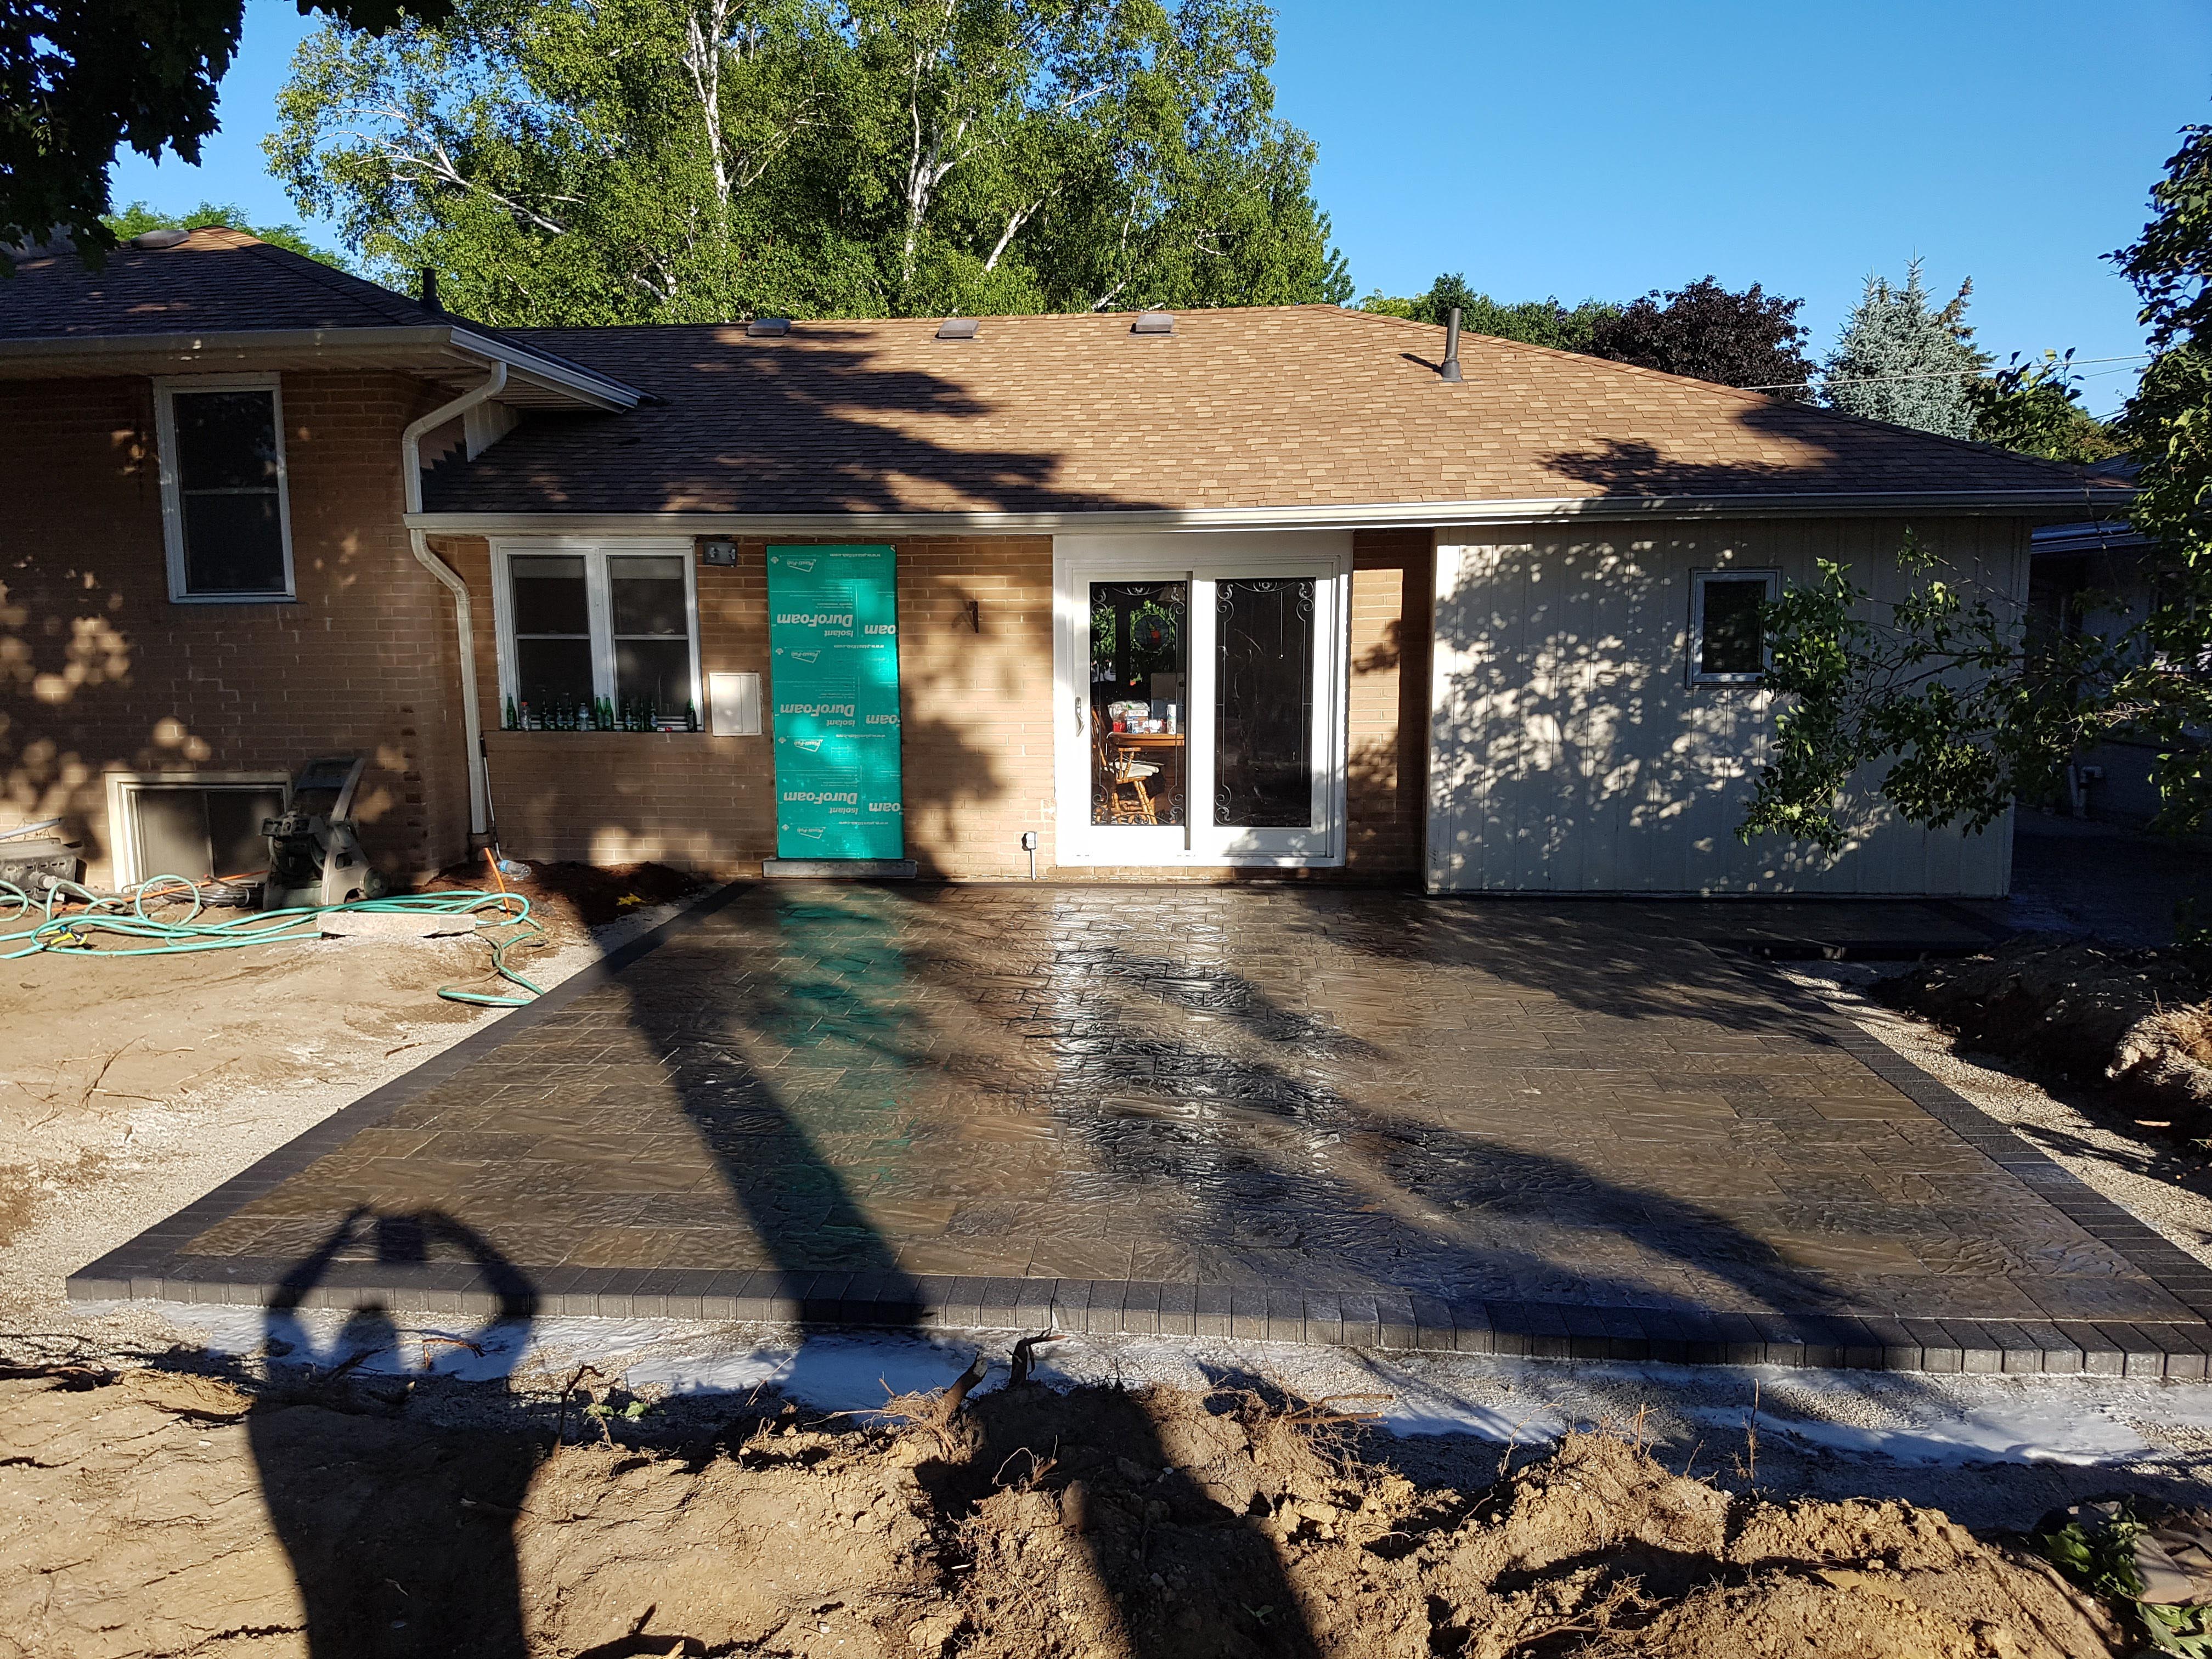 Landscaping Toronto - A Terrastone Landscaping concrete patio is being built in front of a house.